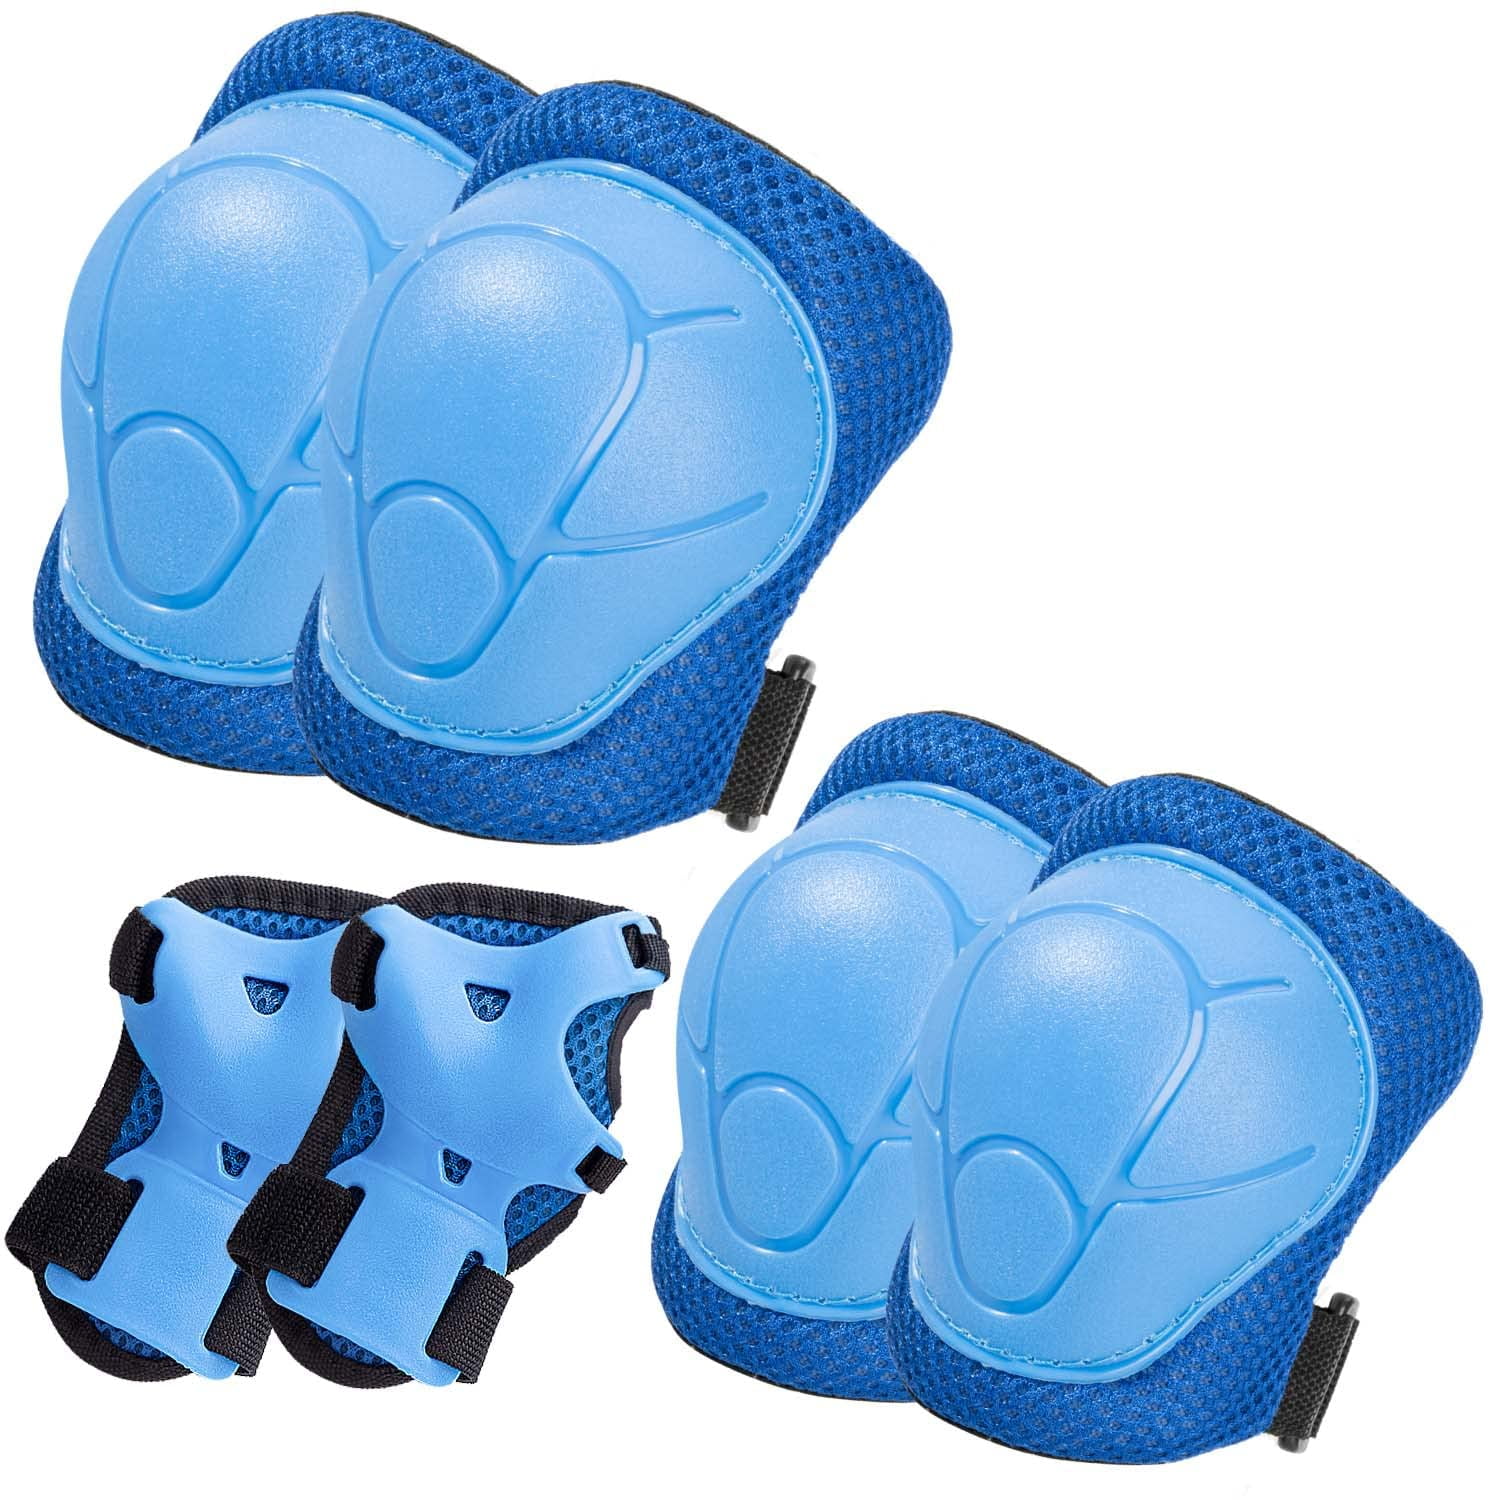 Kids/Youth Protective Gear - Knee Pads Elbow Pads Wrist Guards